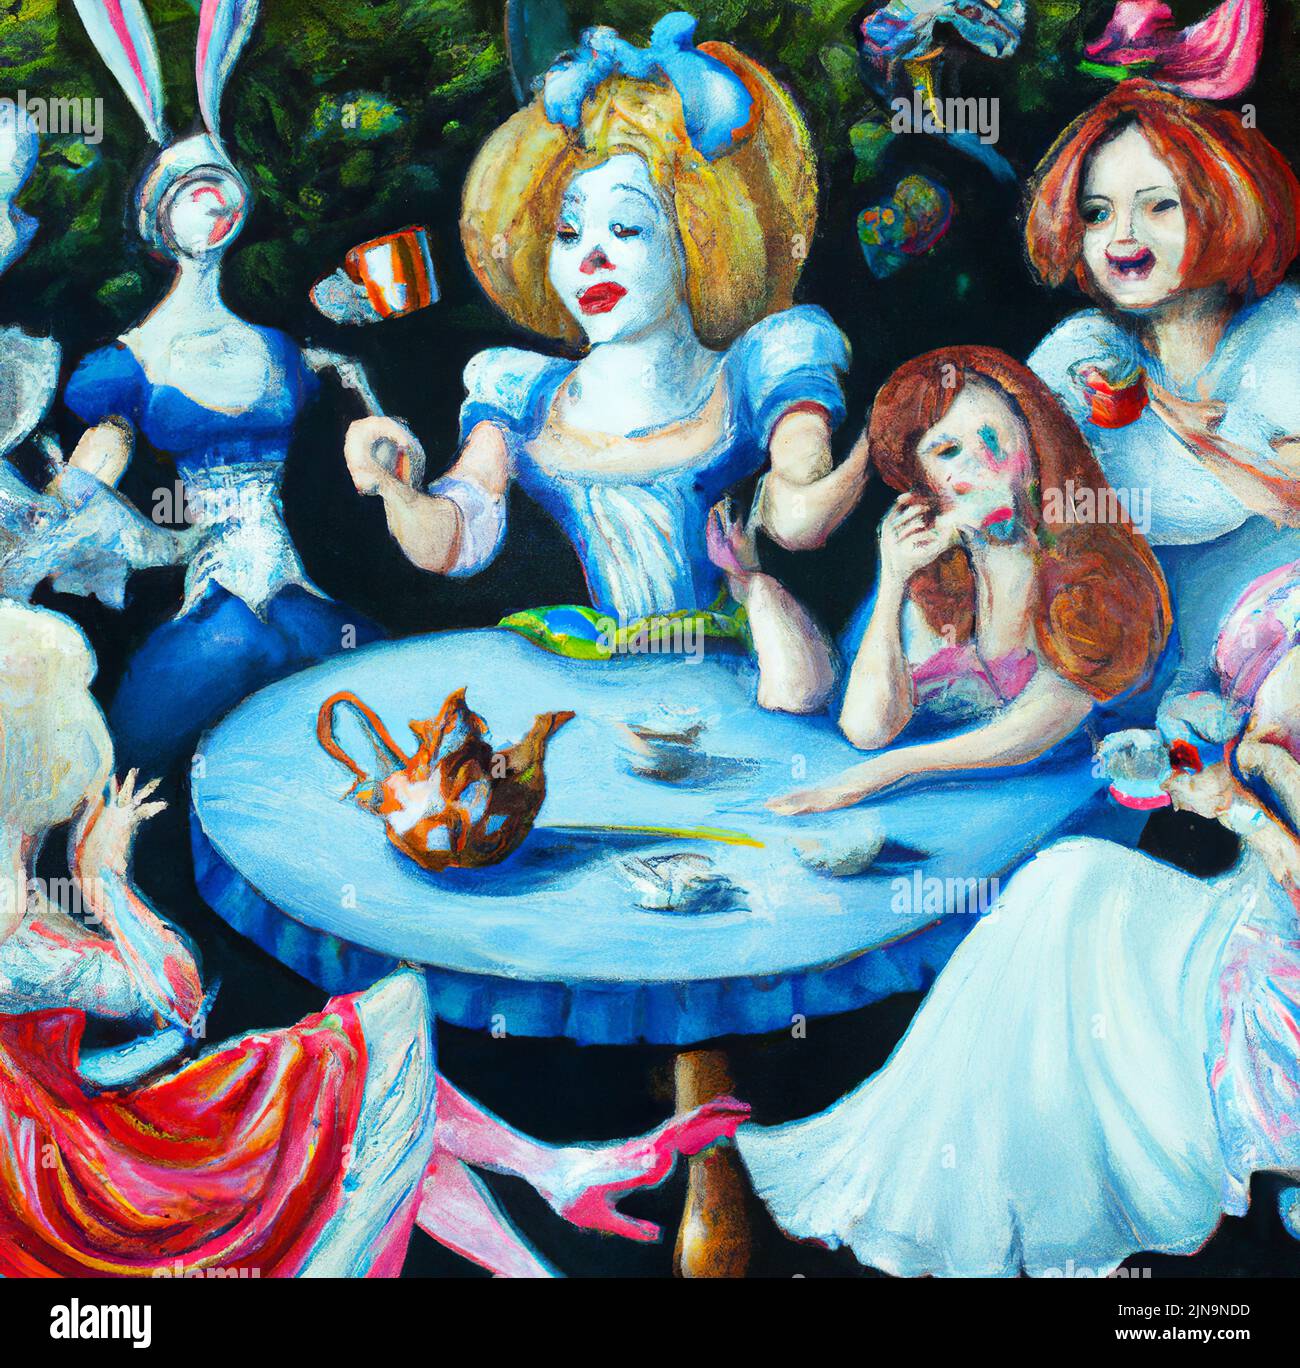 https://c8.alamy.com/comp/2JN9NDD/alice-in-wonderland-motifs-mad-tea-party-lewis-carroll-fairy-tale-with-mad-crazy-characters-digital-oil-painting-art-illustration-for-print-2JN9NDD.jpg